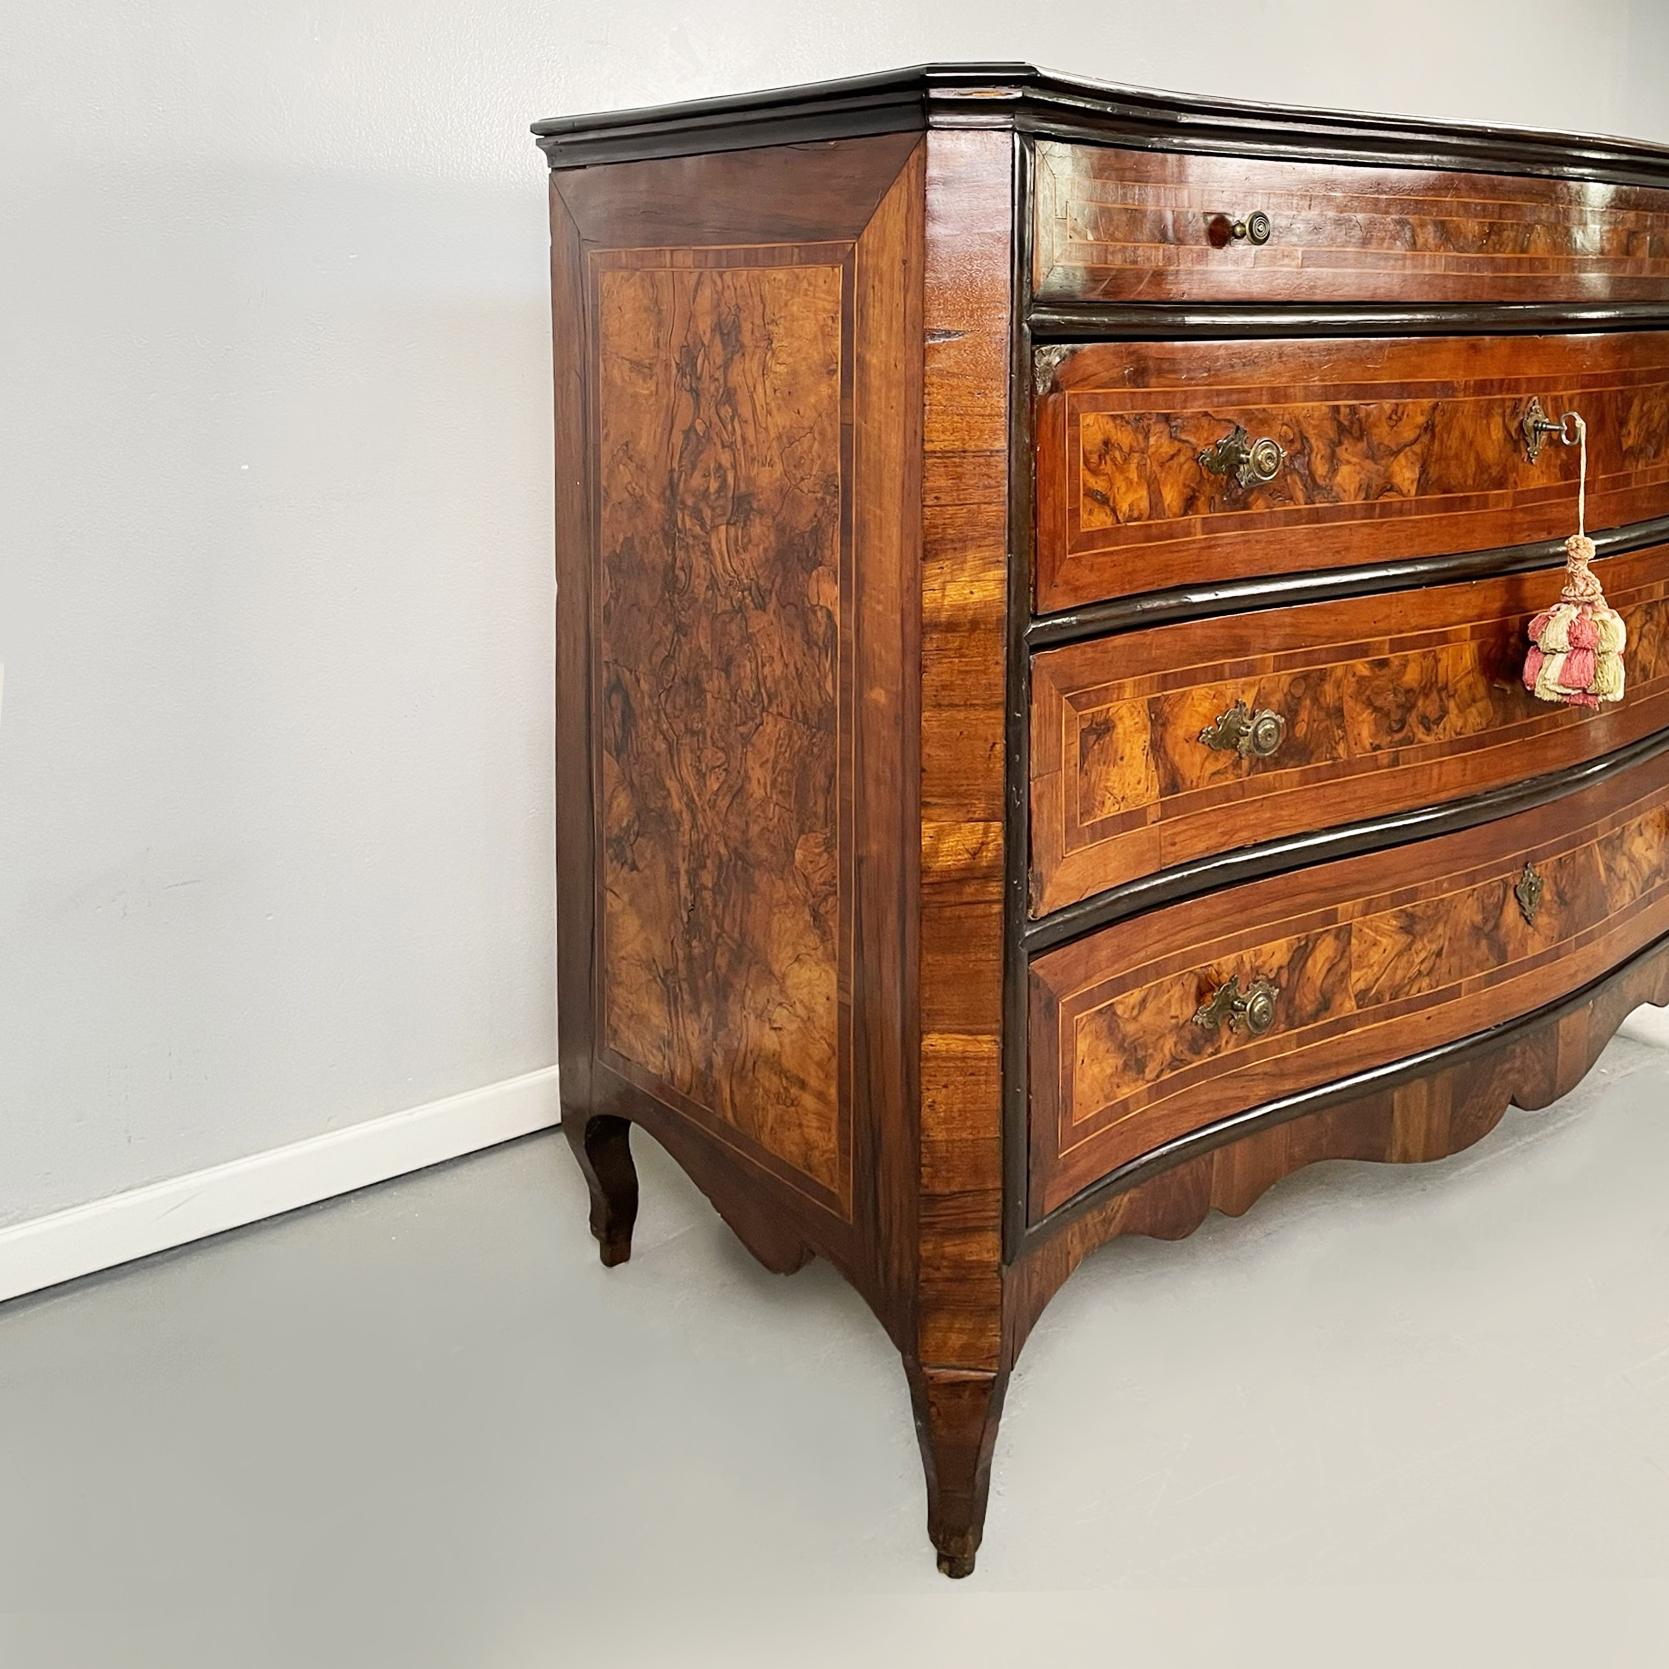 Italian baroque chests of drawers in wood and metal, 1730-1740s For Sale 7